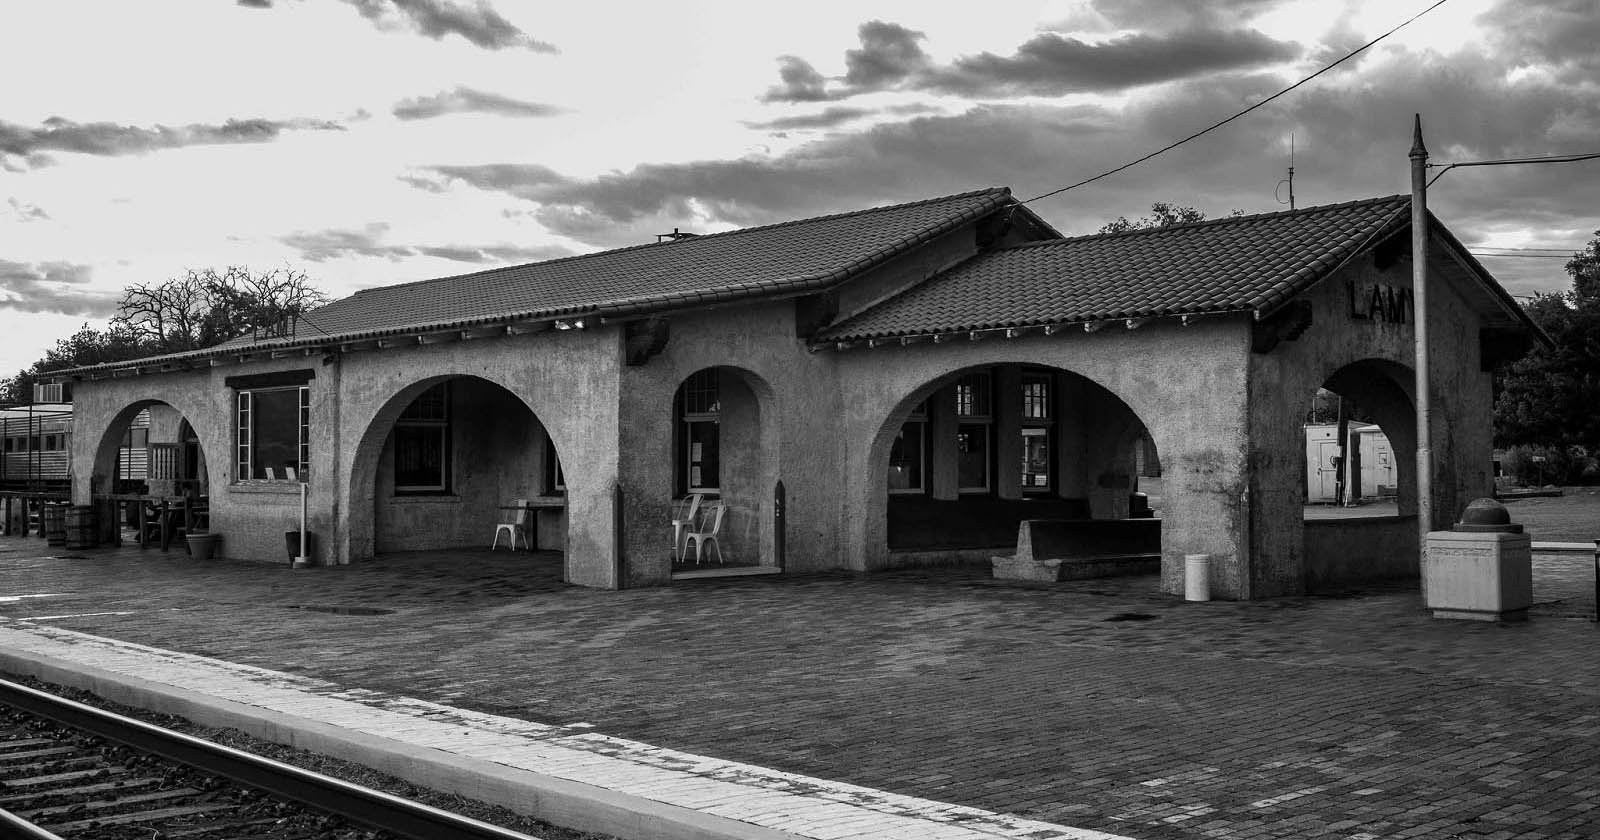 Oppenheimers New Mexico Train Stop Can Be Visited in Real Life